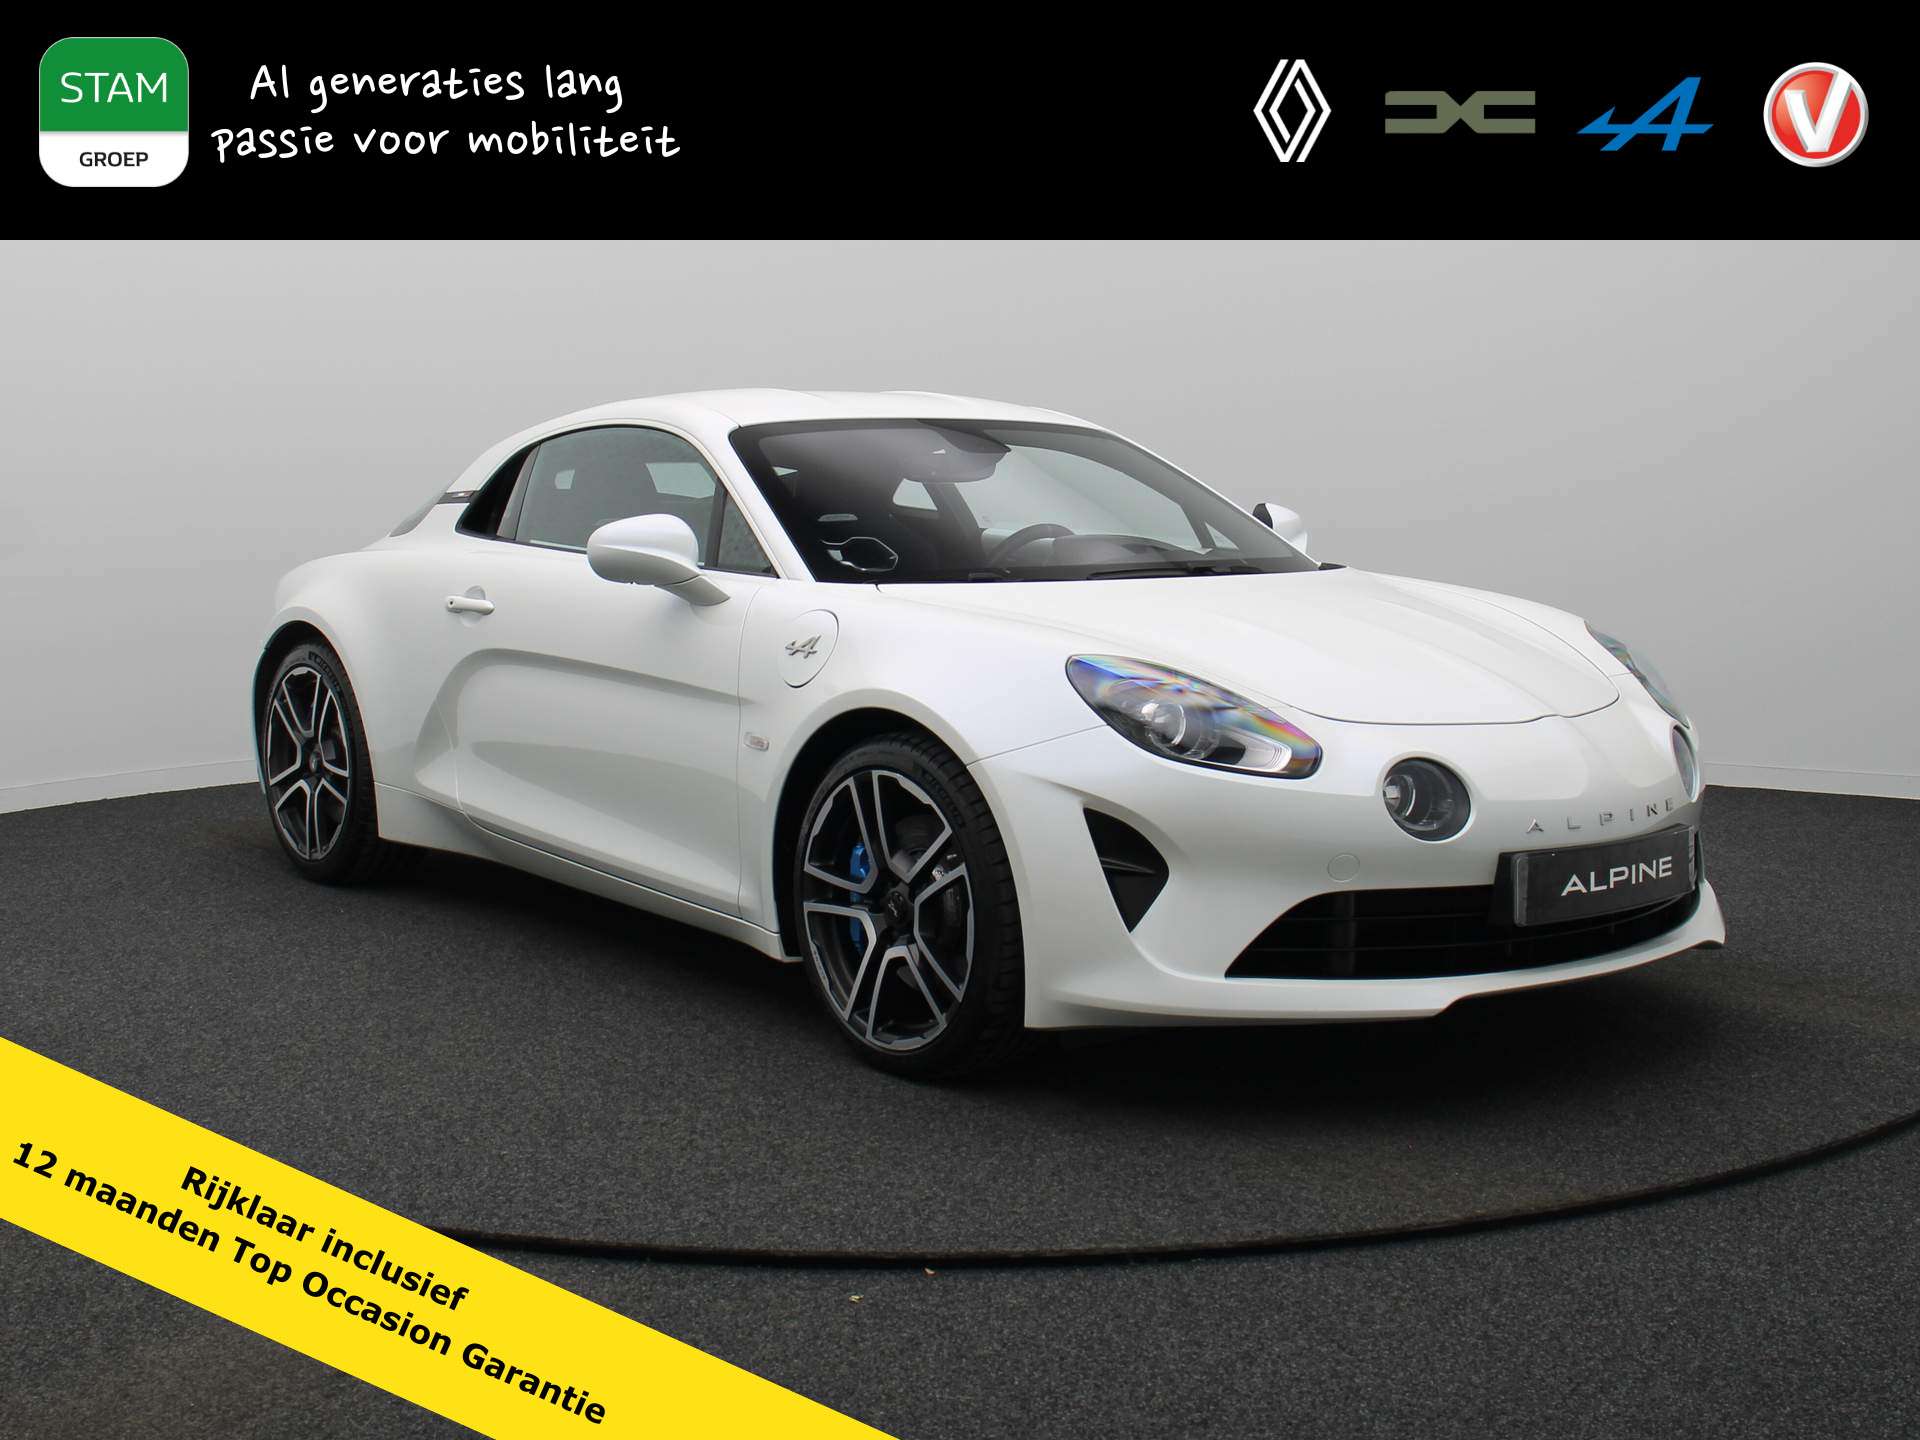 Alpine A110 Coupe in White used in SOEST for € 67,990.-